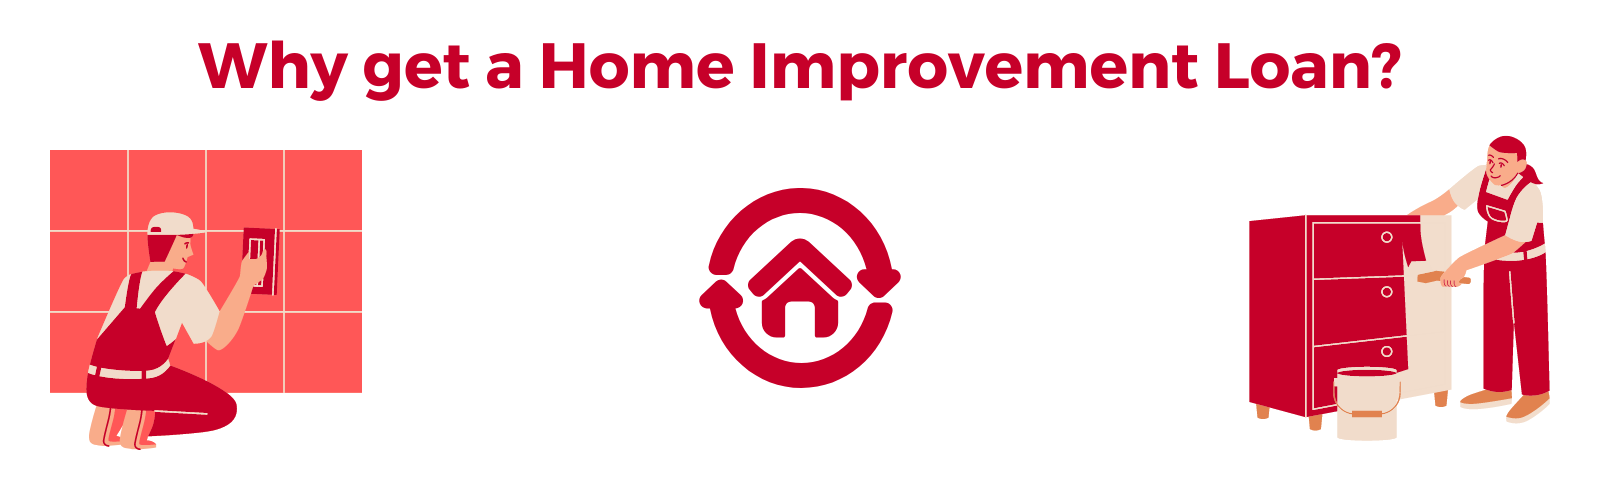 Why get a Home Improvement Loan